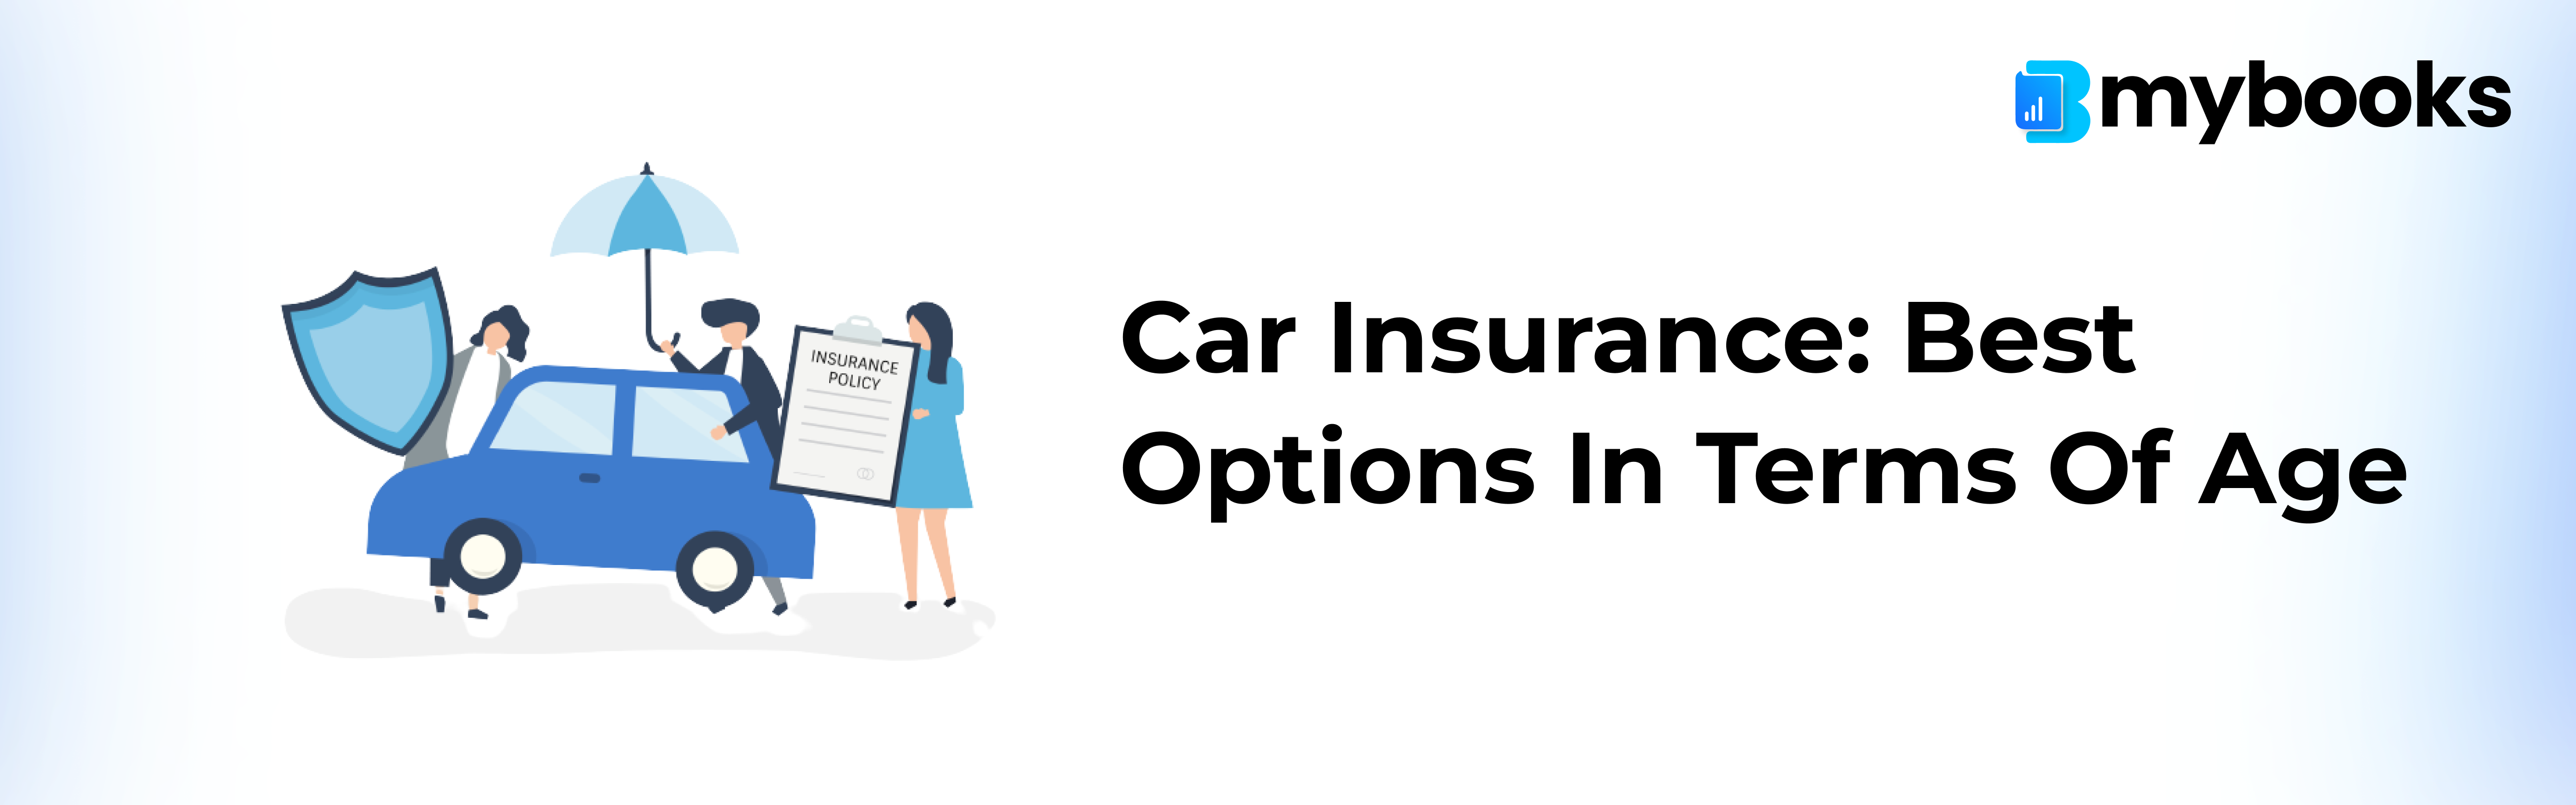 Car Insurance Best-Options-in-Terms-of-Age